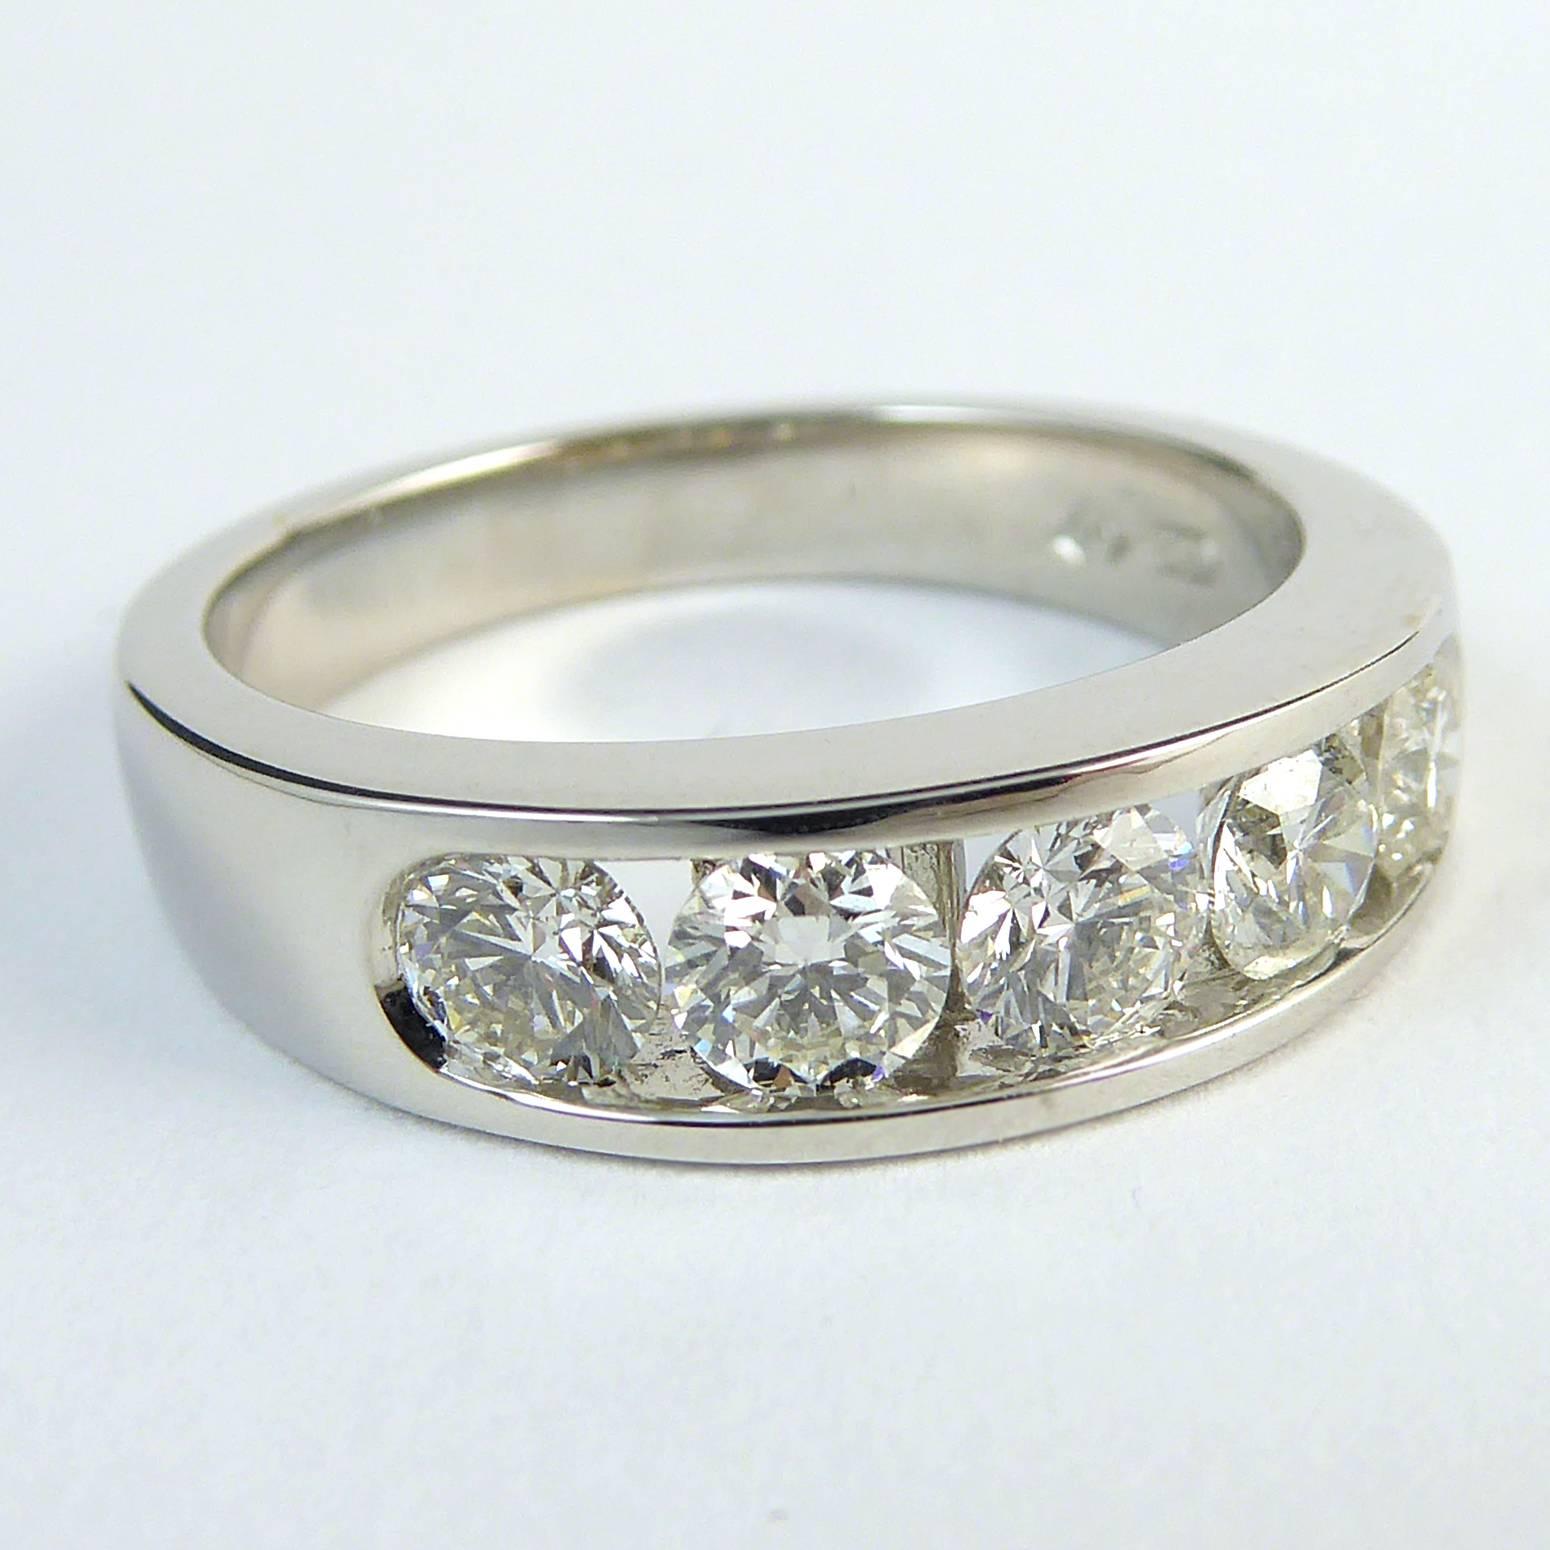 Fabulous wedding ring or eternity ring set with five brilliant cut diamonds approx 3.8mm diameter and with a total carat weight 1/03ct. Colour and clarity assessed as H/I and VS/SI.  The diaonds are in a channel setting to the front half of an 18ct